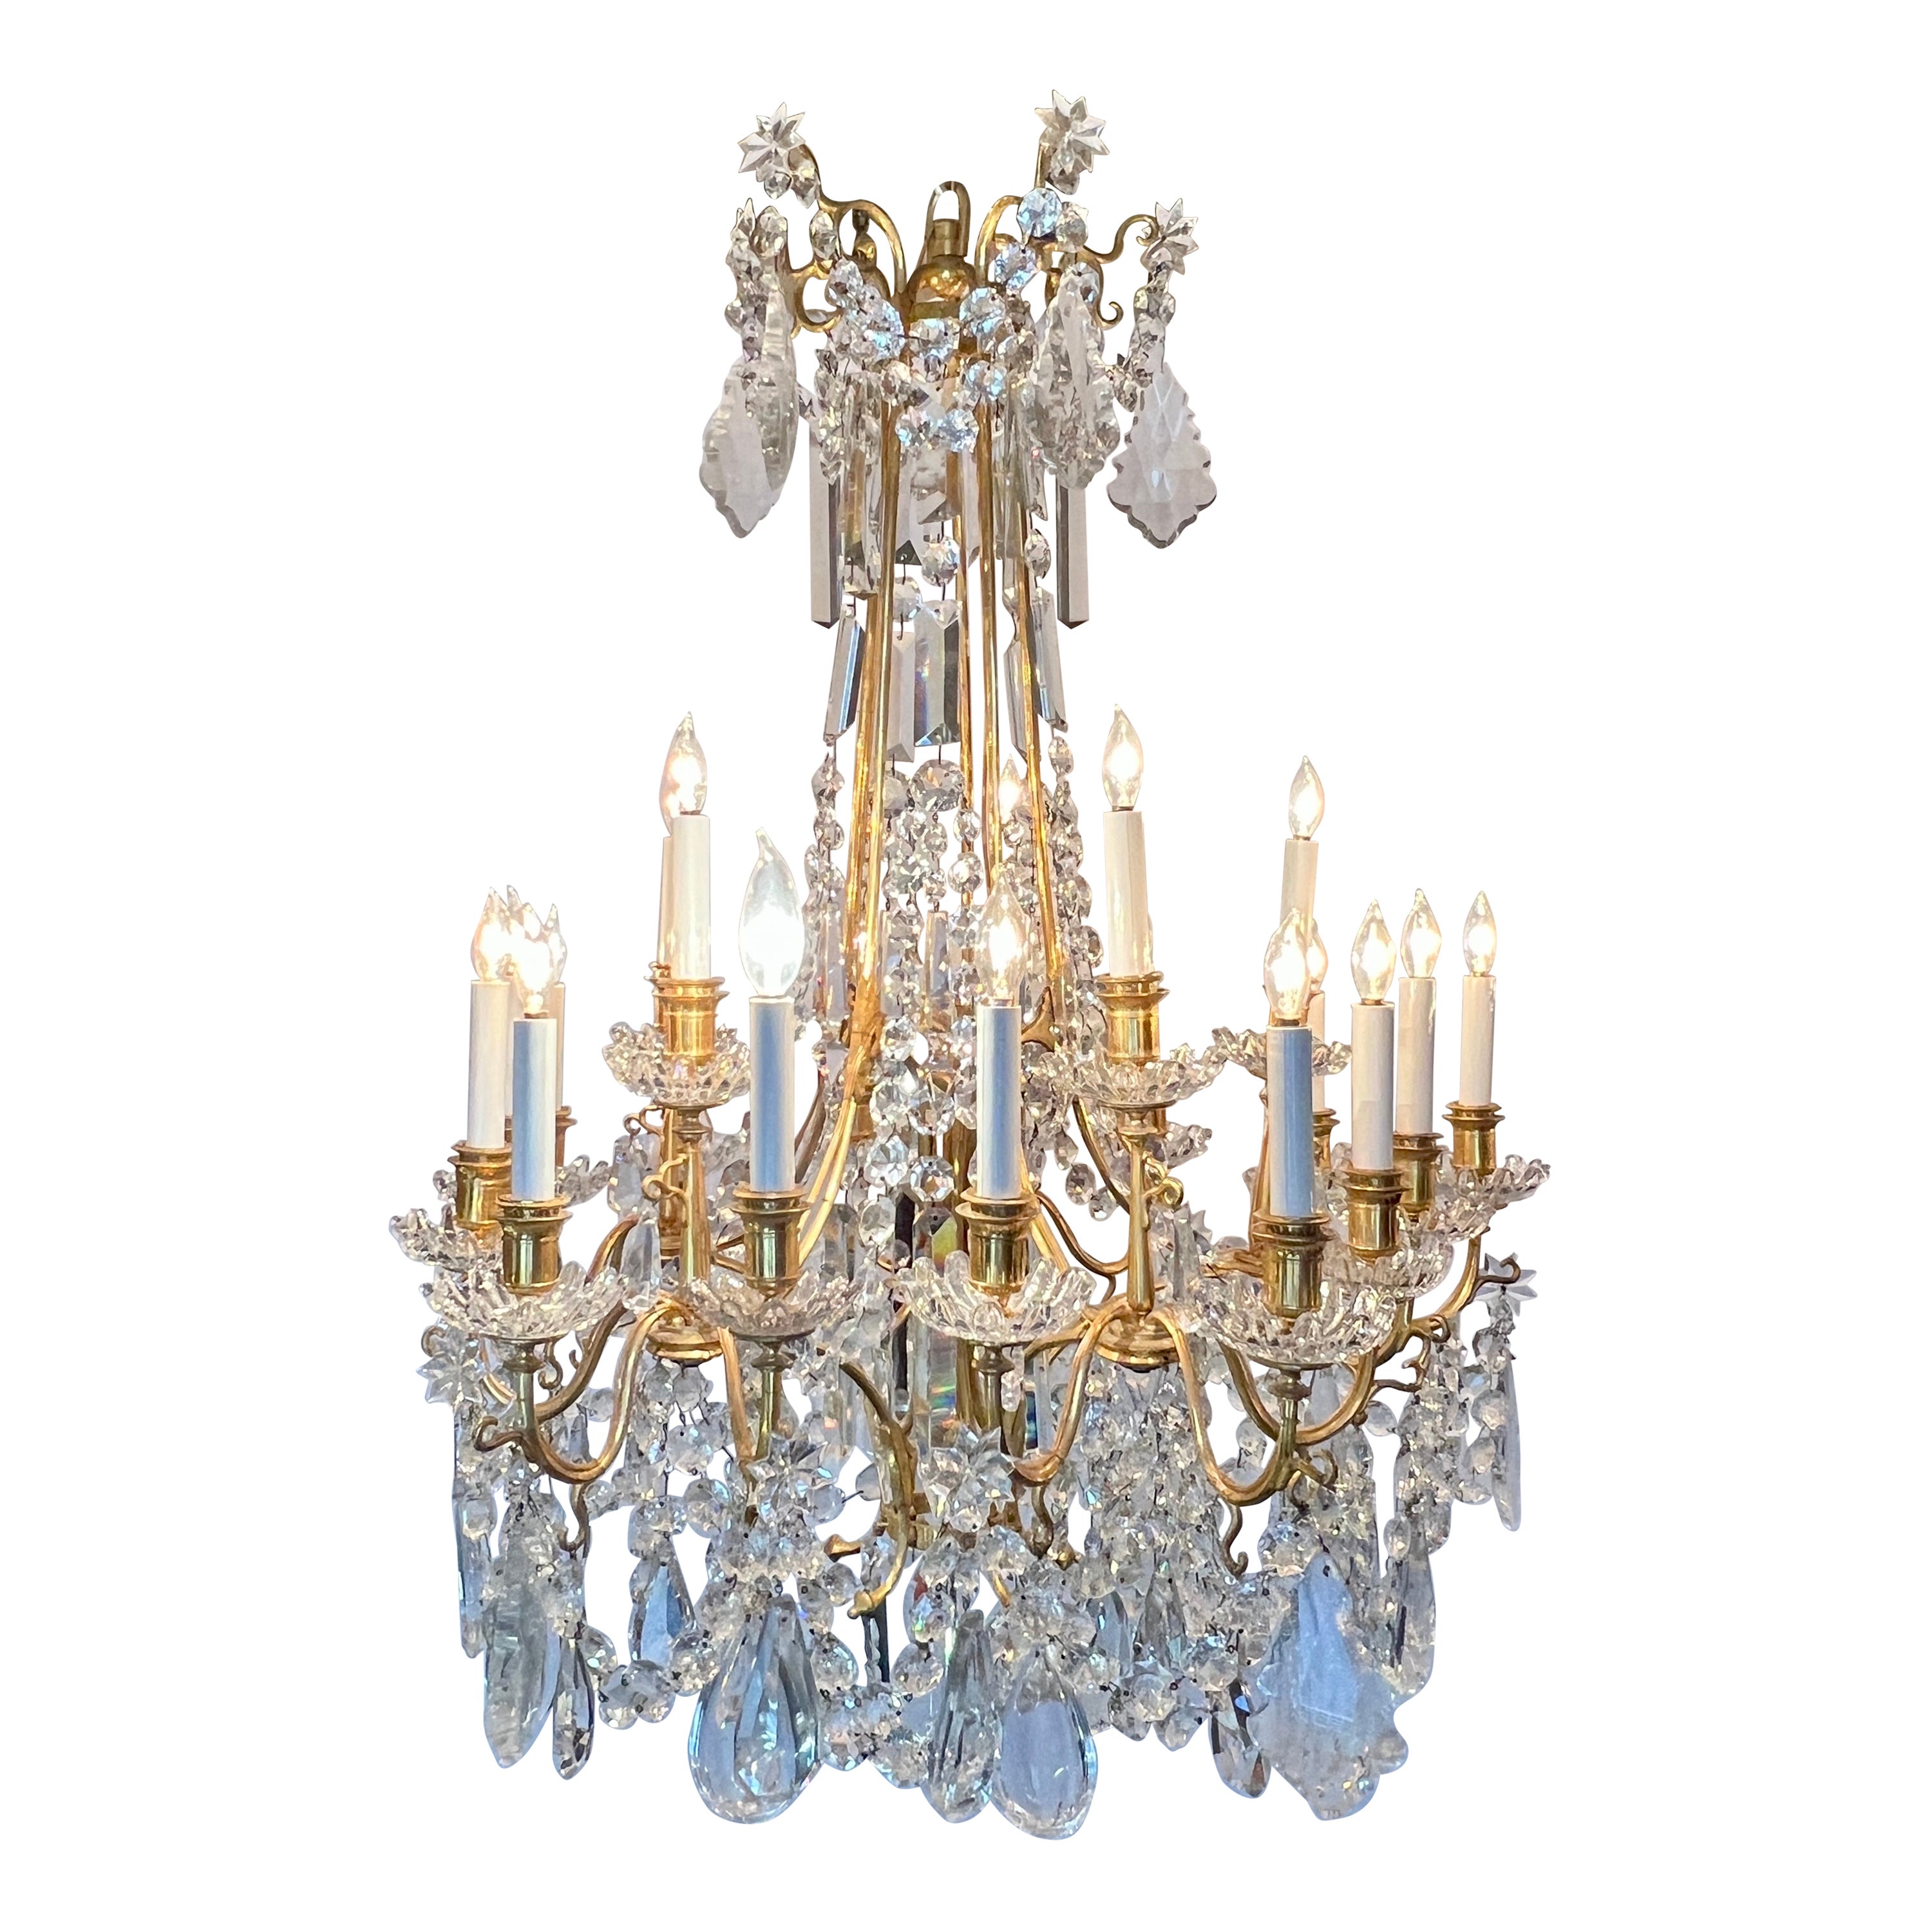 Antique French Gold Bronze & Baccarat Crystal Chandelier, Circa 1880-1890 For Sale